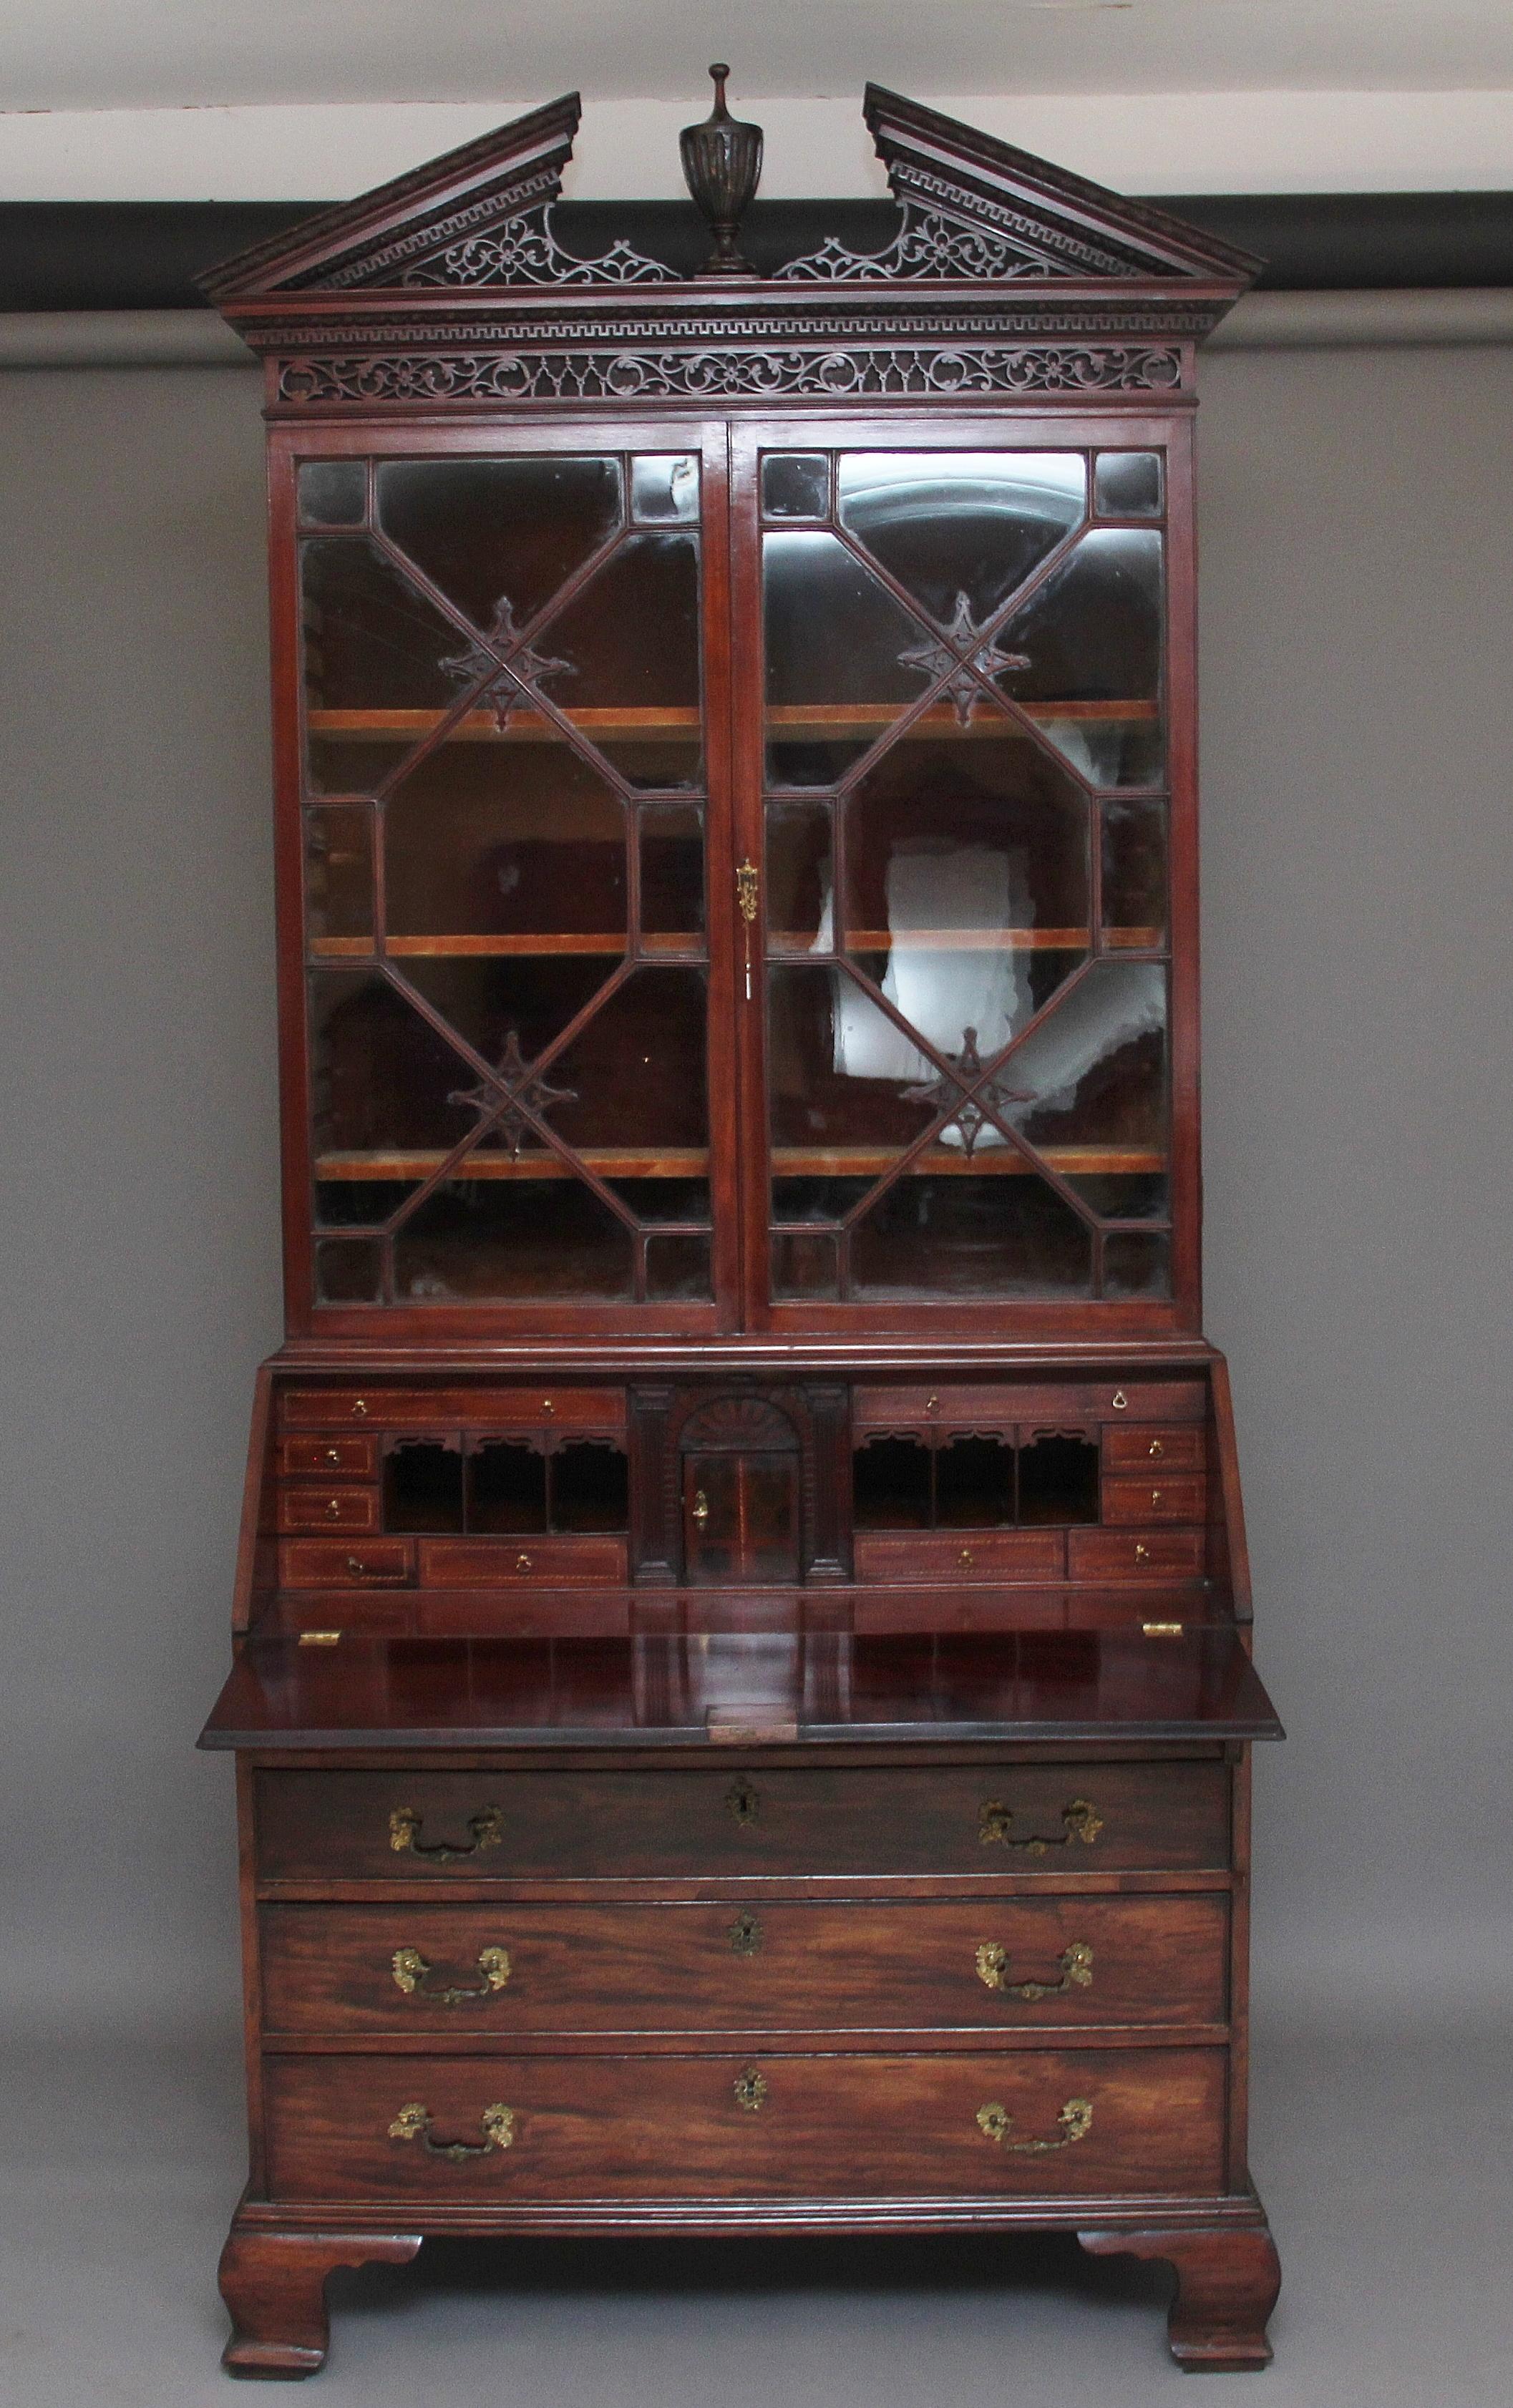 A superb quality 18th century mahogany bureau bookcase, having a wonderful pierced broken arch pediment with a decorative turned and fluted finial at the centre above a pierced frieze, the top section having two astrigal glazed doors opening to